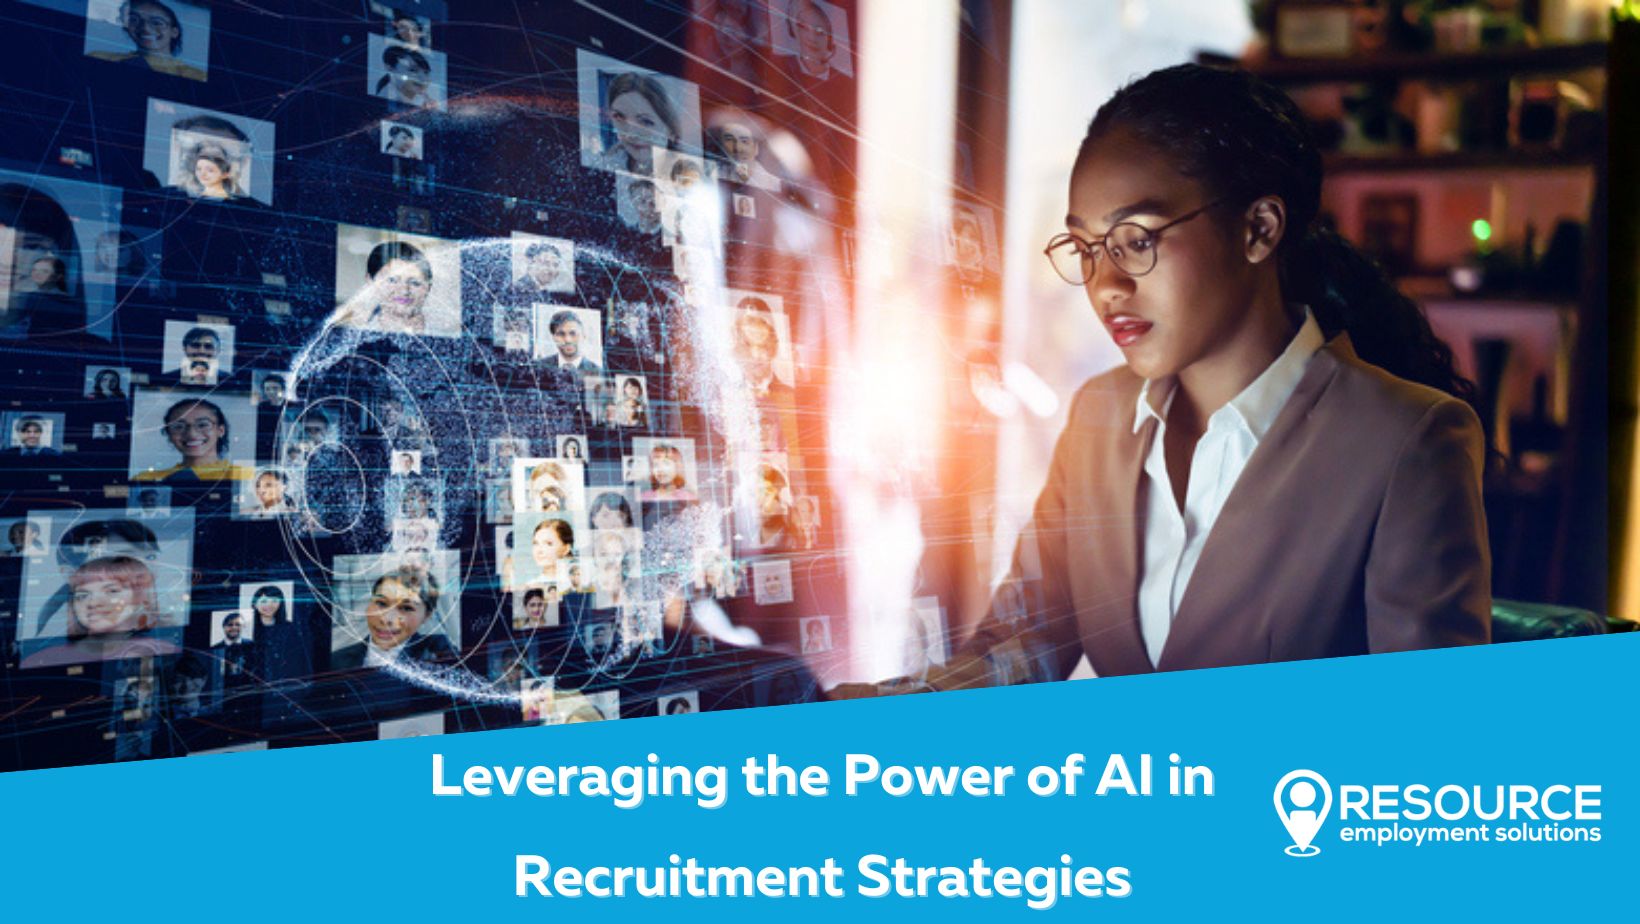  Leveraging the Power of AI in Recruitment Strategies